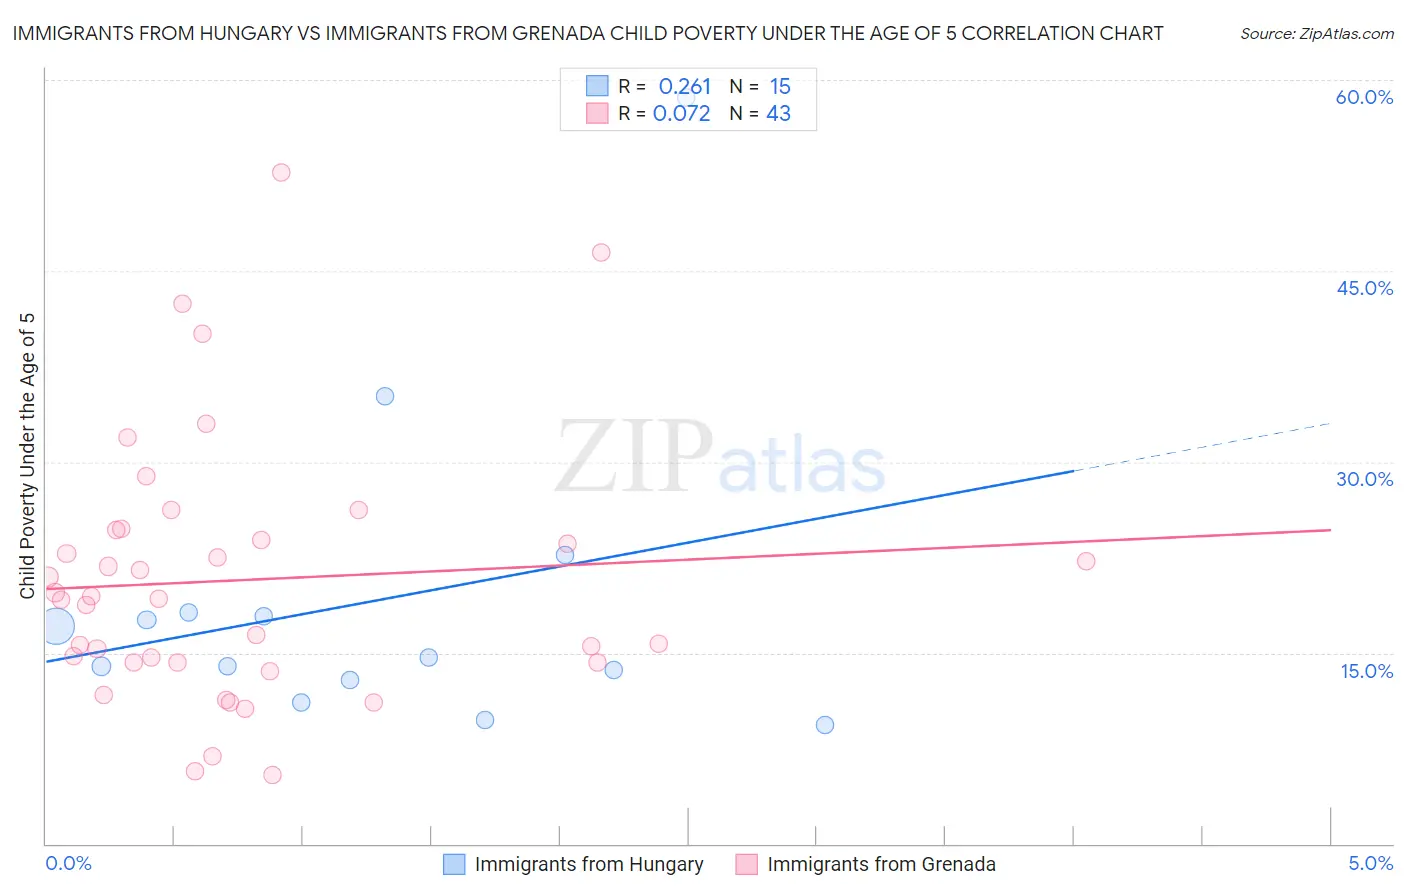 Immigrants from Hungary vs Immigrants from Grenada Child Poverty Under the Age of 5